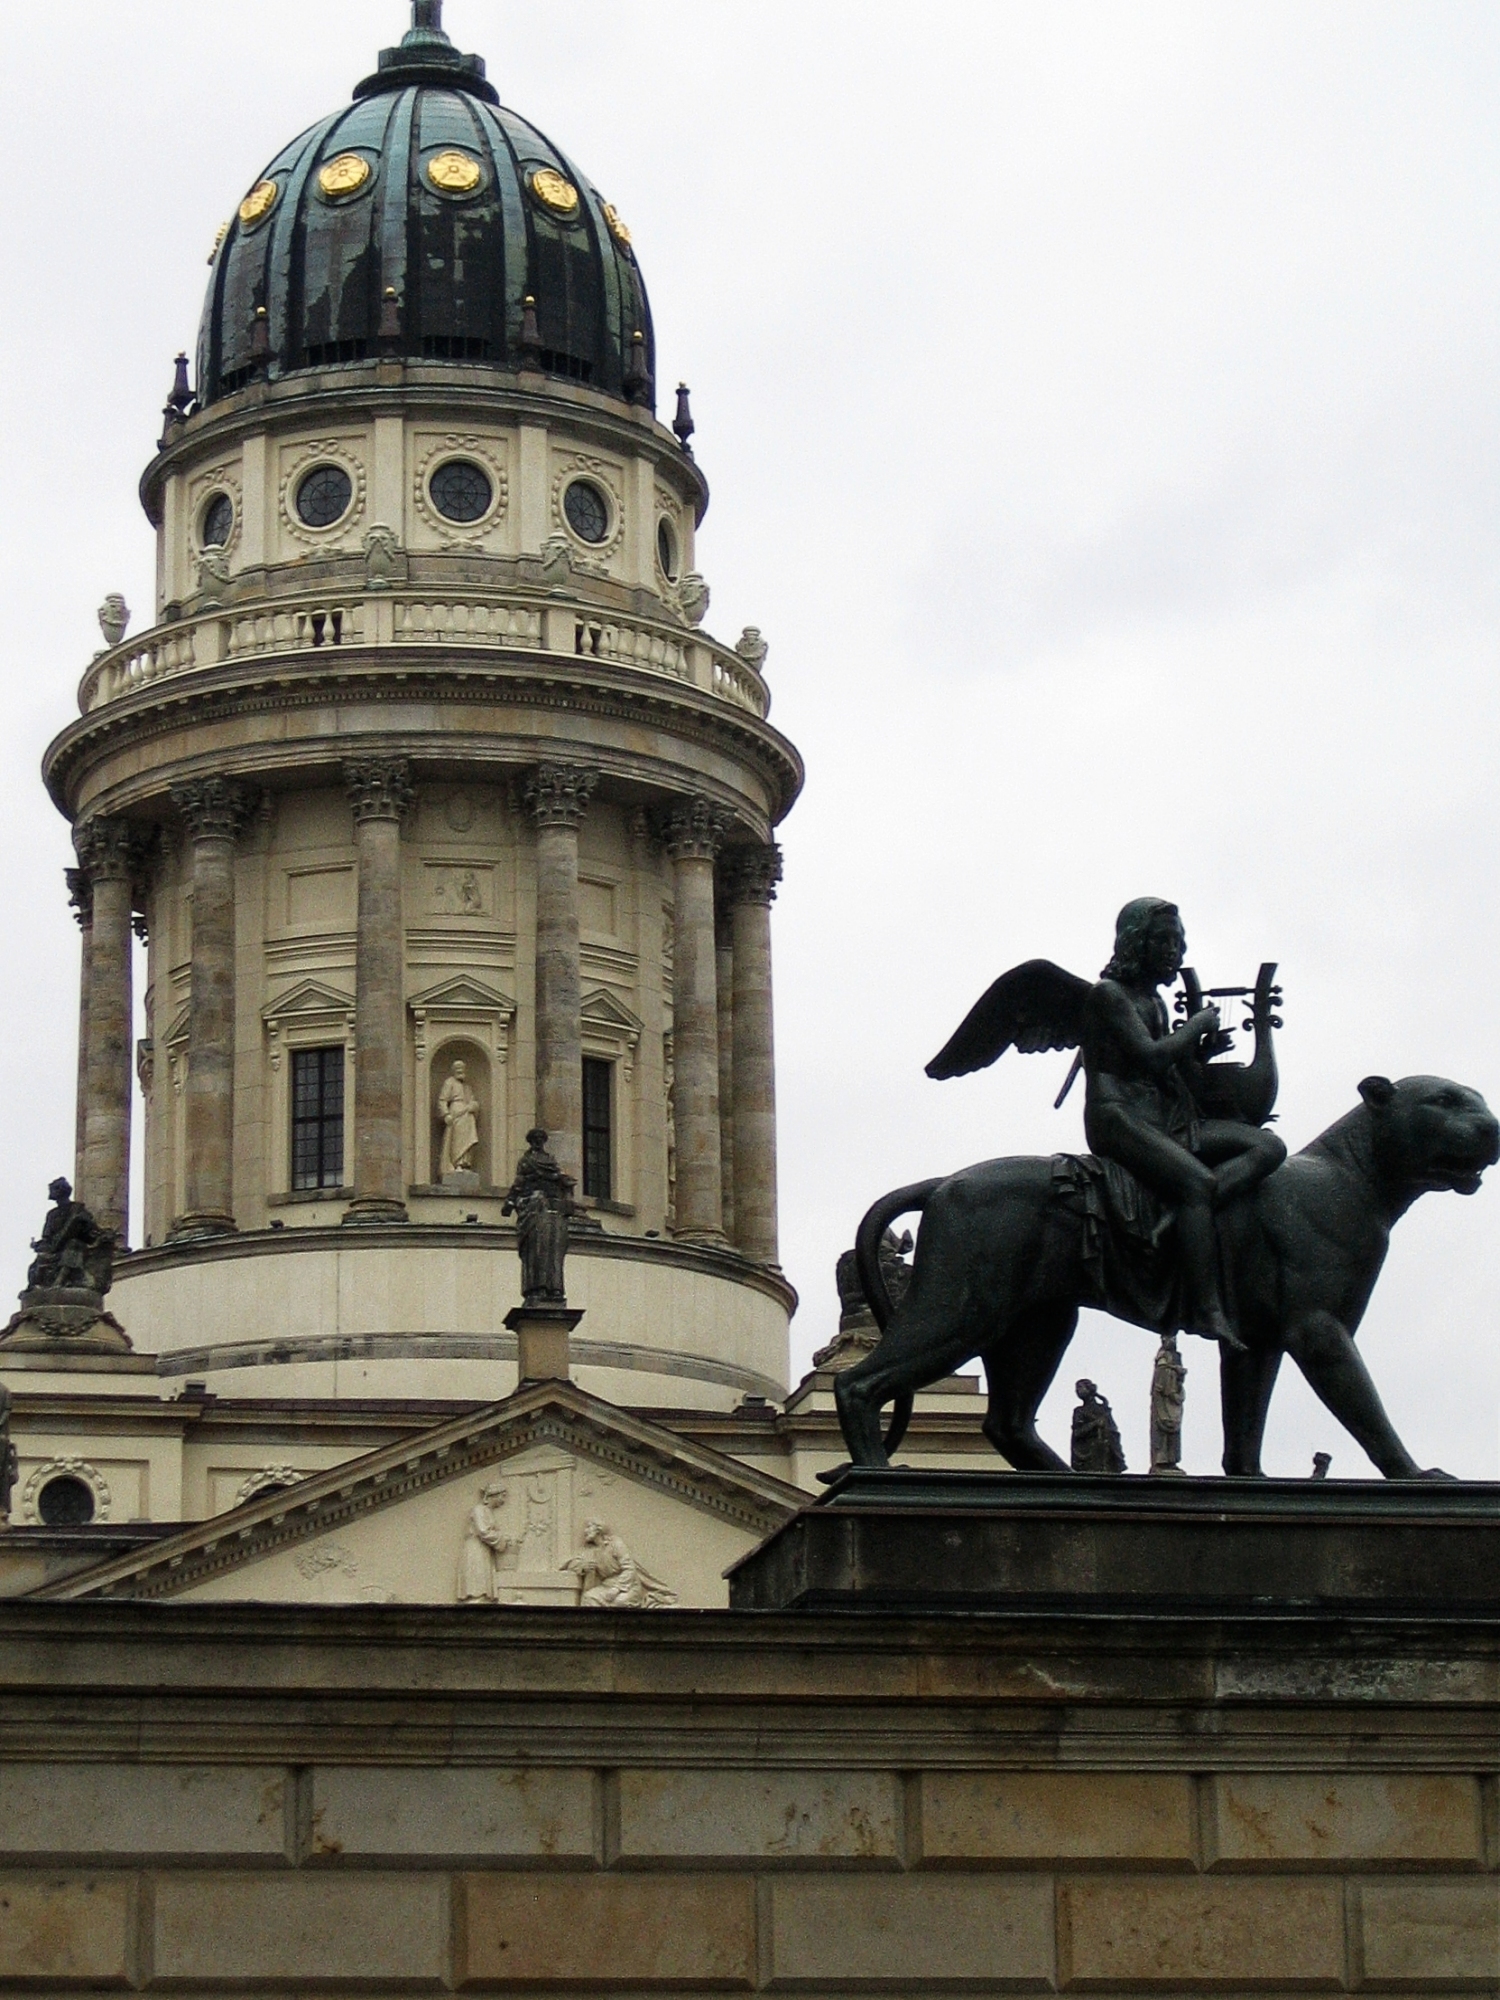 the view of a building with statue and dome in background